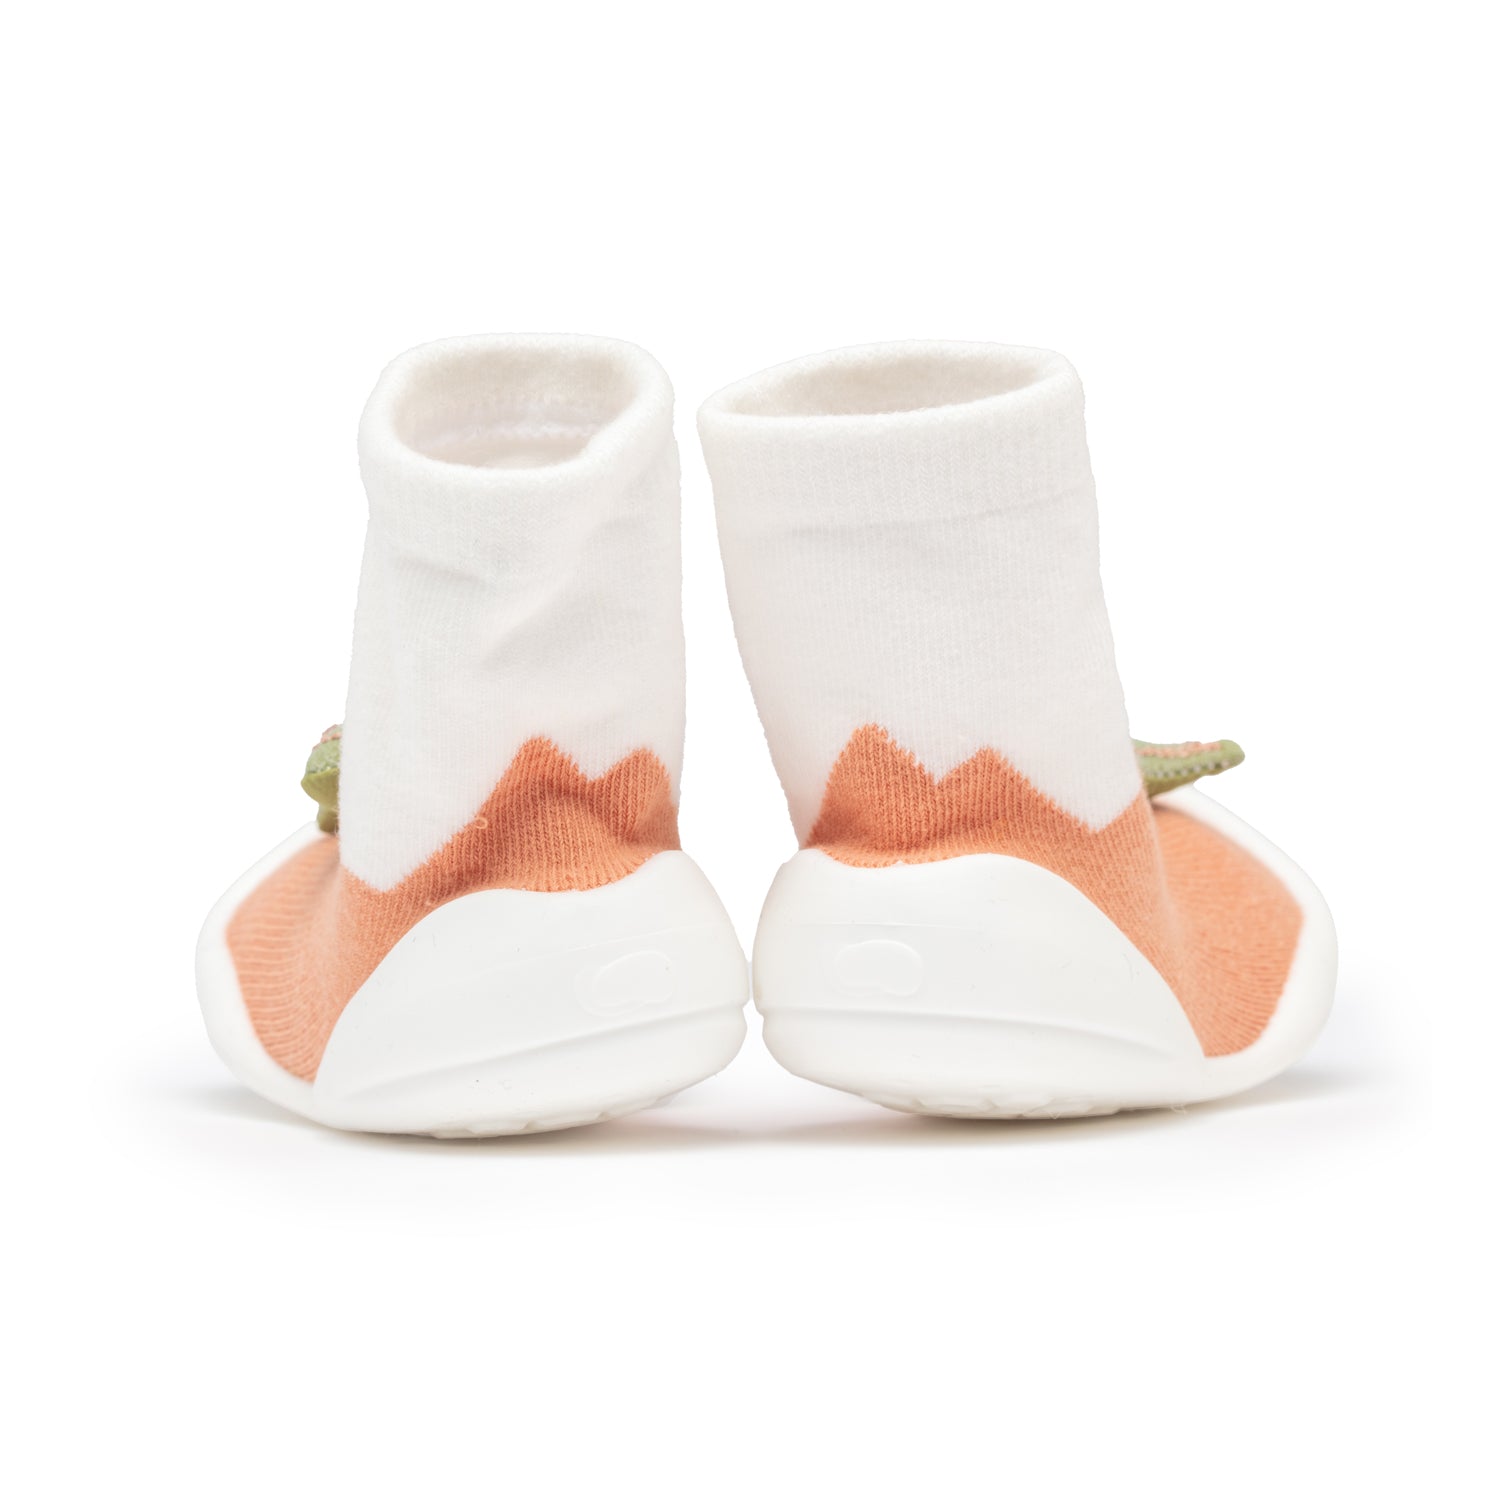 Komuello baby toddler firstwalker sock shoes: breathable, washable -  Dinosaurs